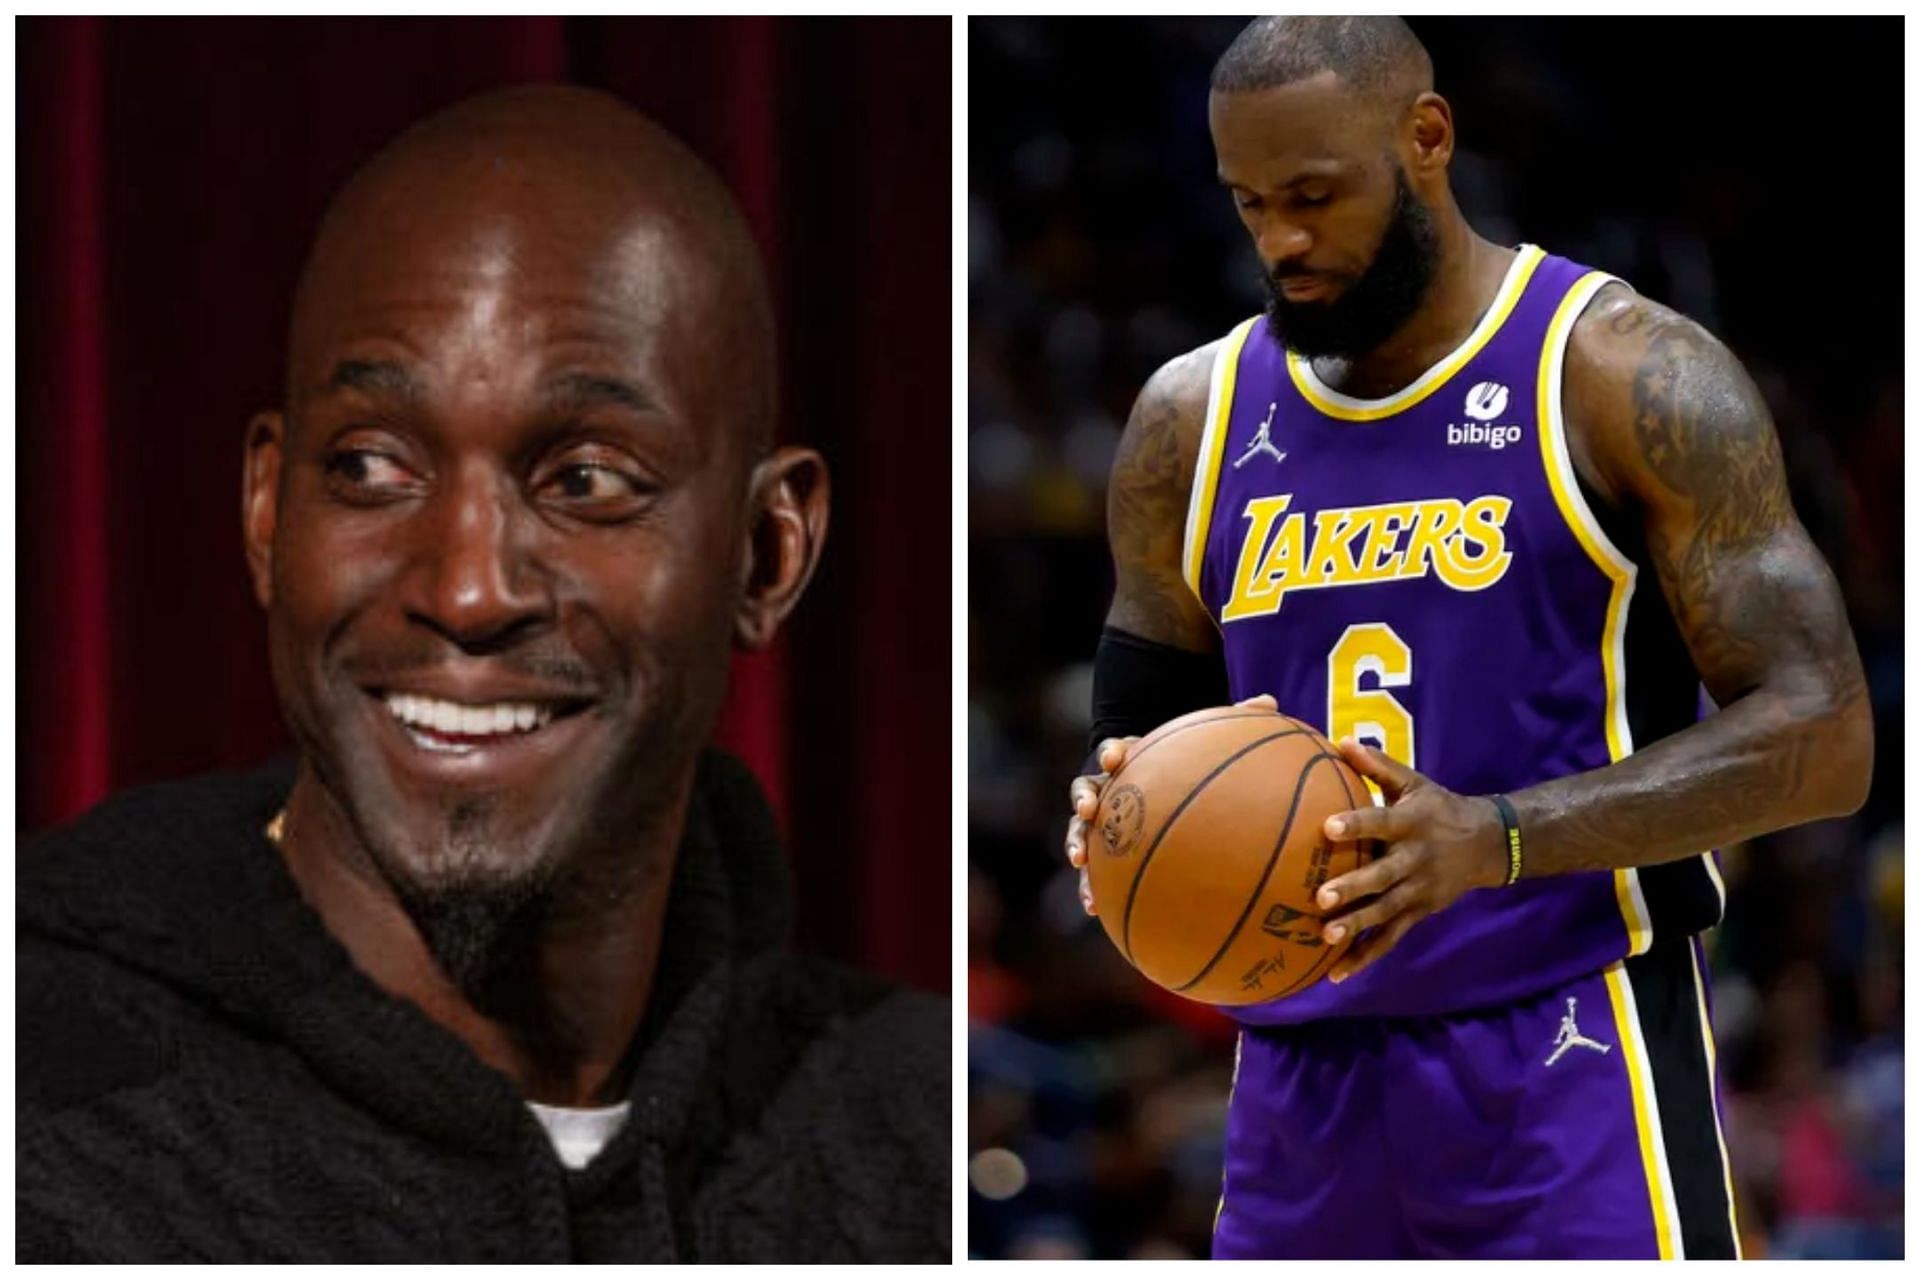 Kevin Garnett (left) talks about the influence of LeBron James (right)